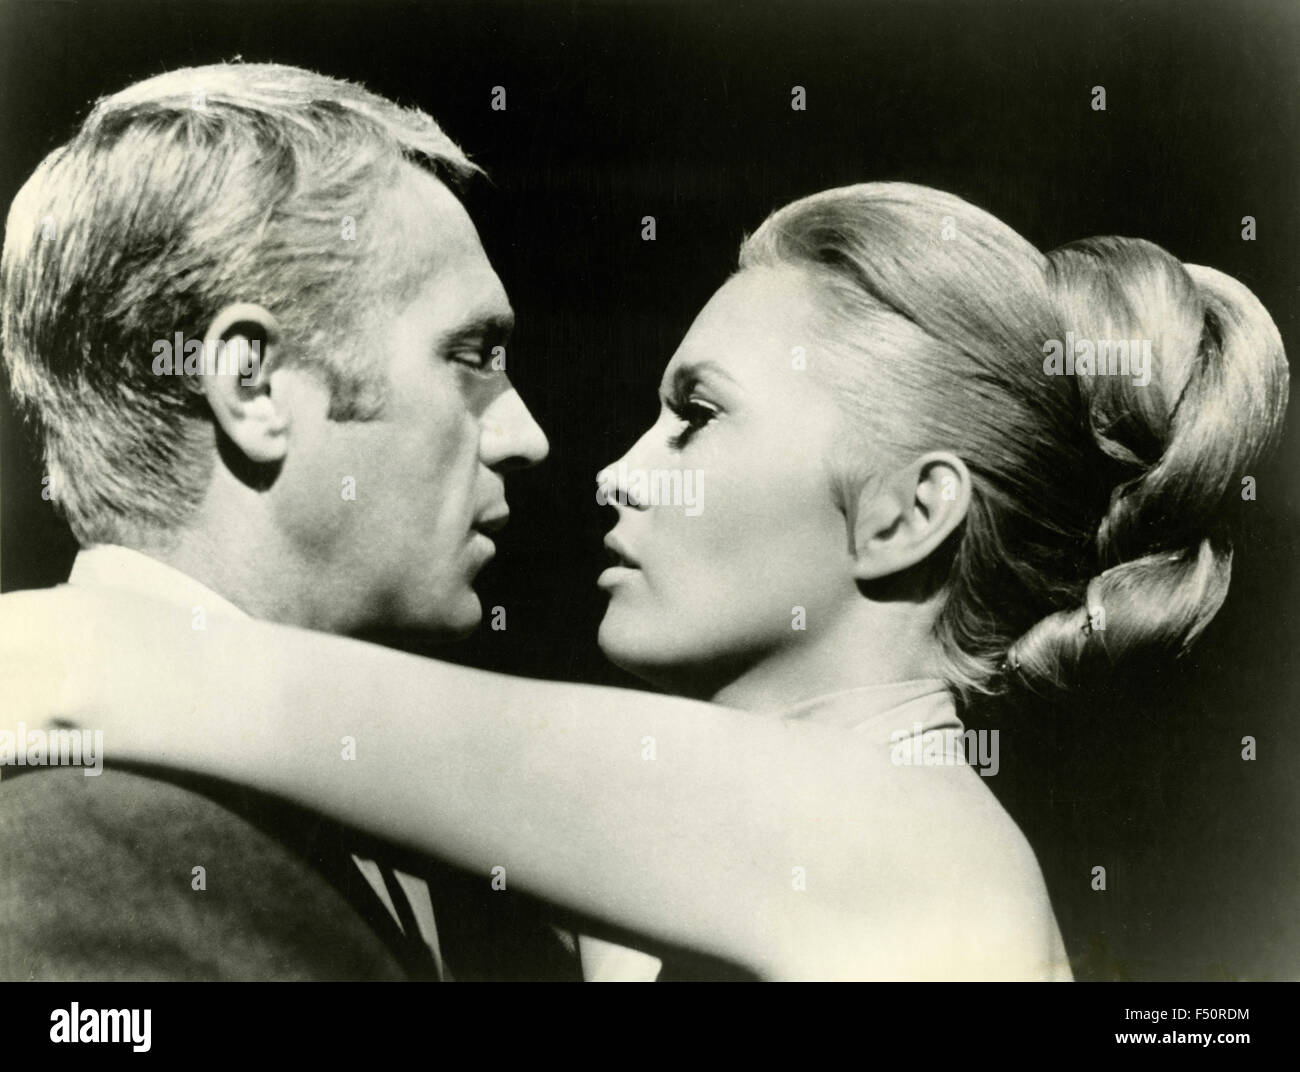 The actors Steve McQueen and Faye Dunaway in a scene from the film 'The Thomas Crown Affair', USA Stock Photo